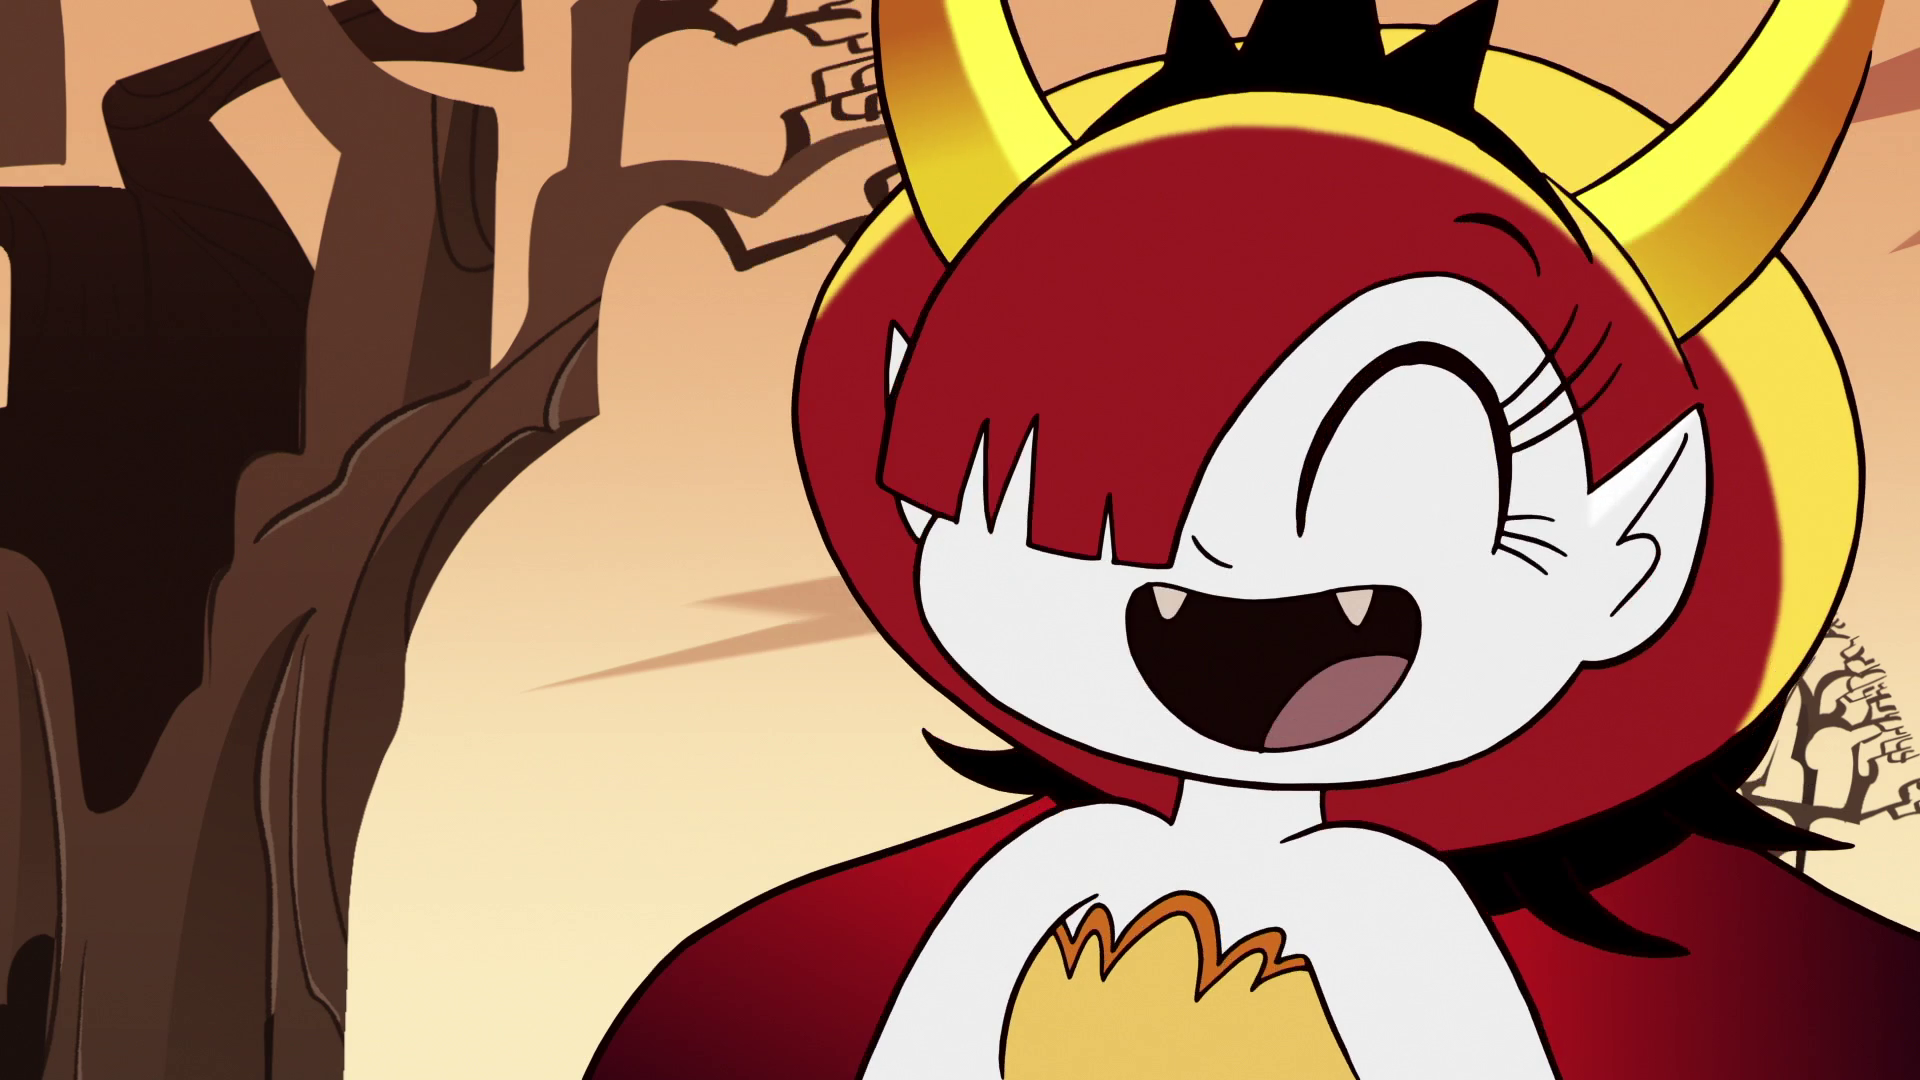 S2E31 Hekapoo Starts Laughing.png - Laughing, Transparent background PNG HD thumbnail